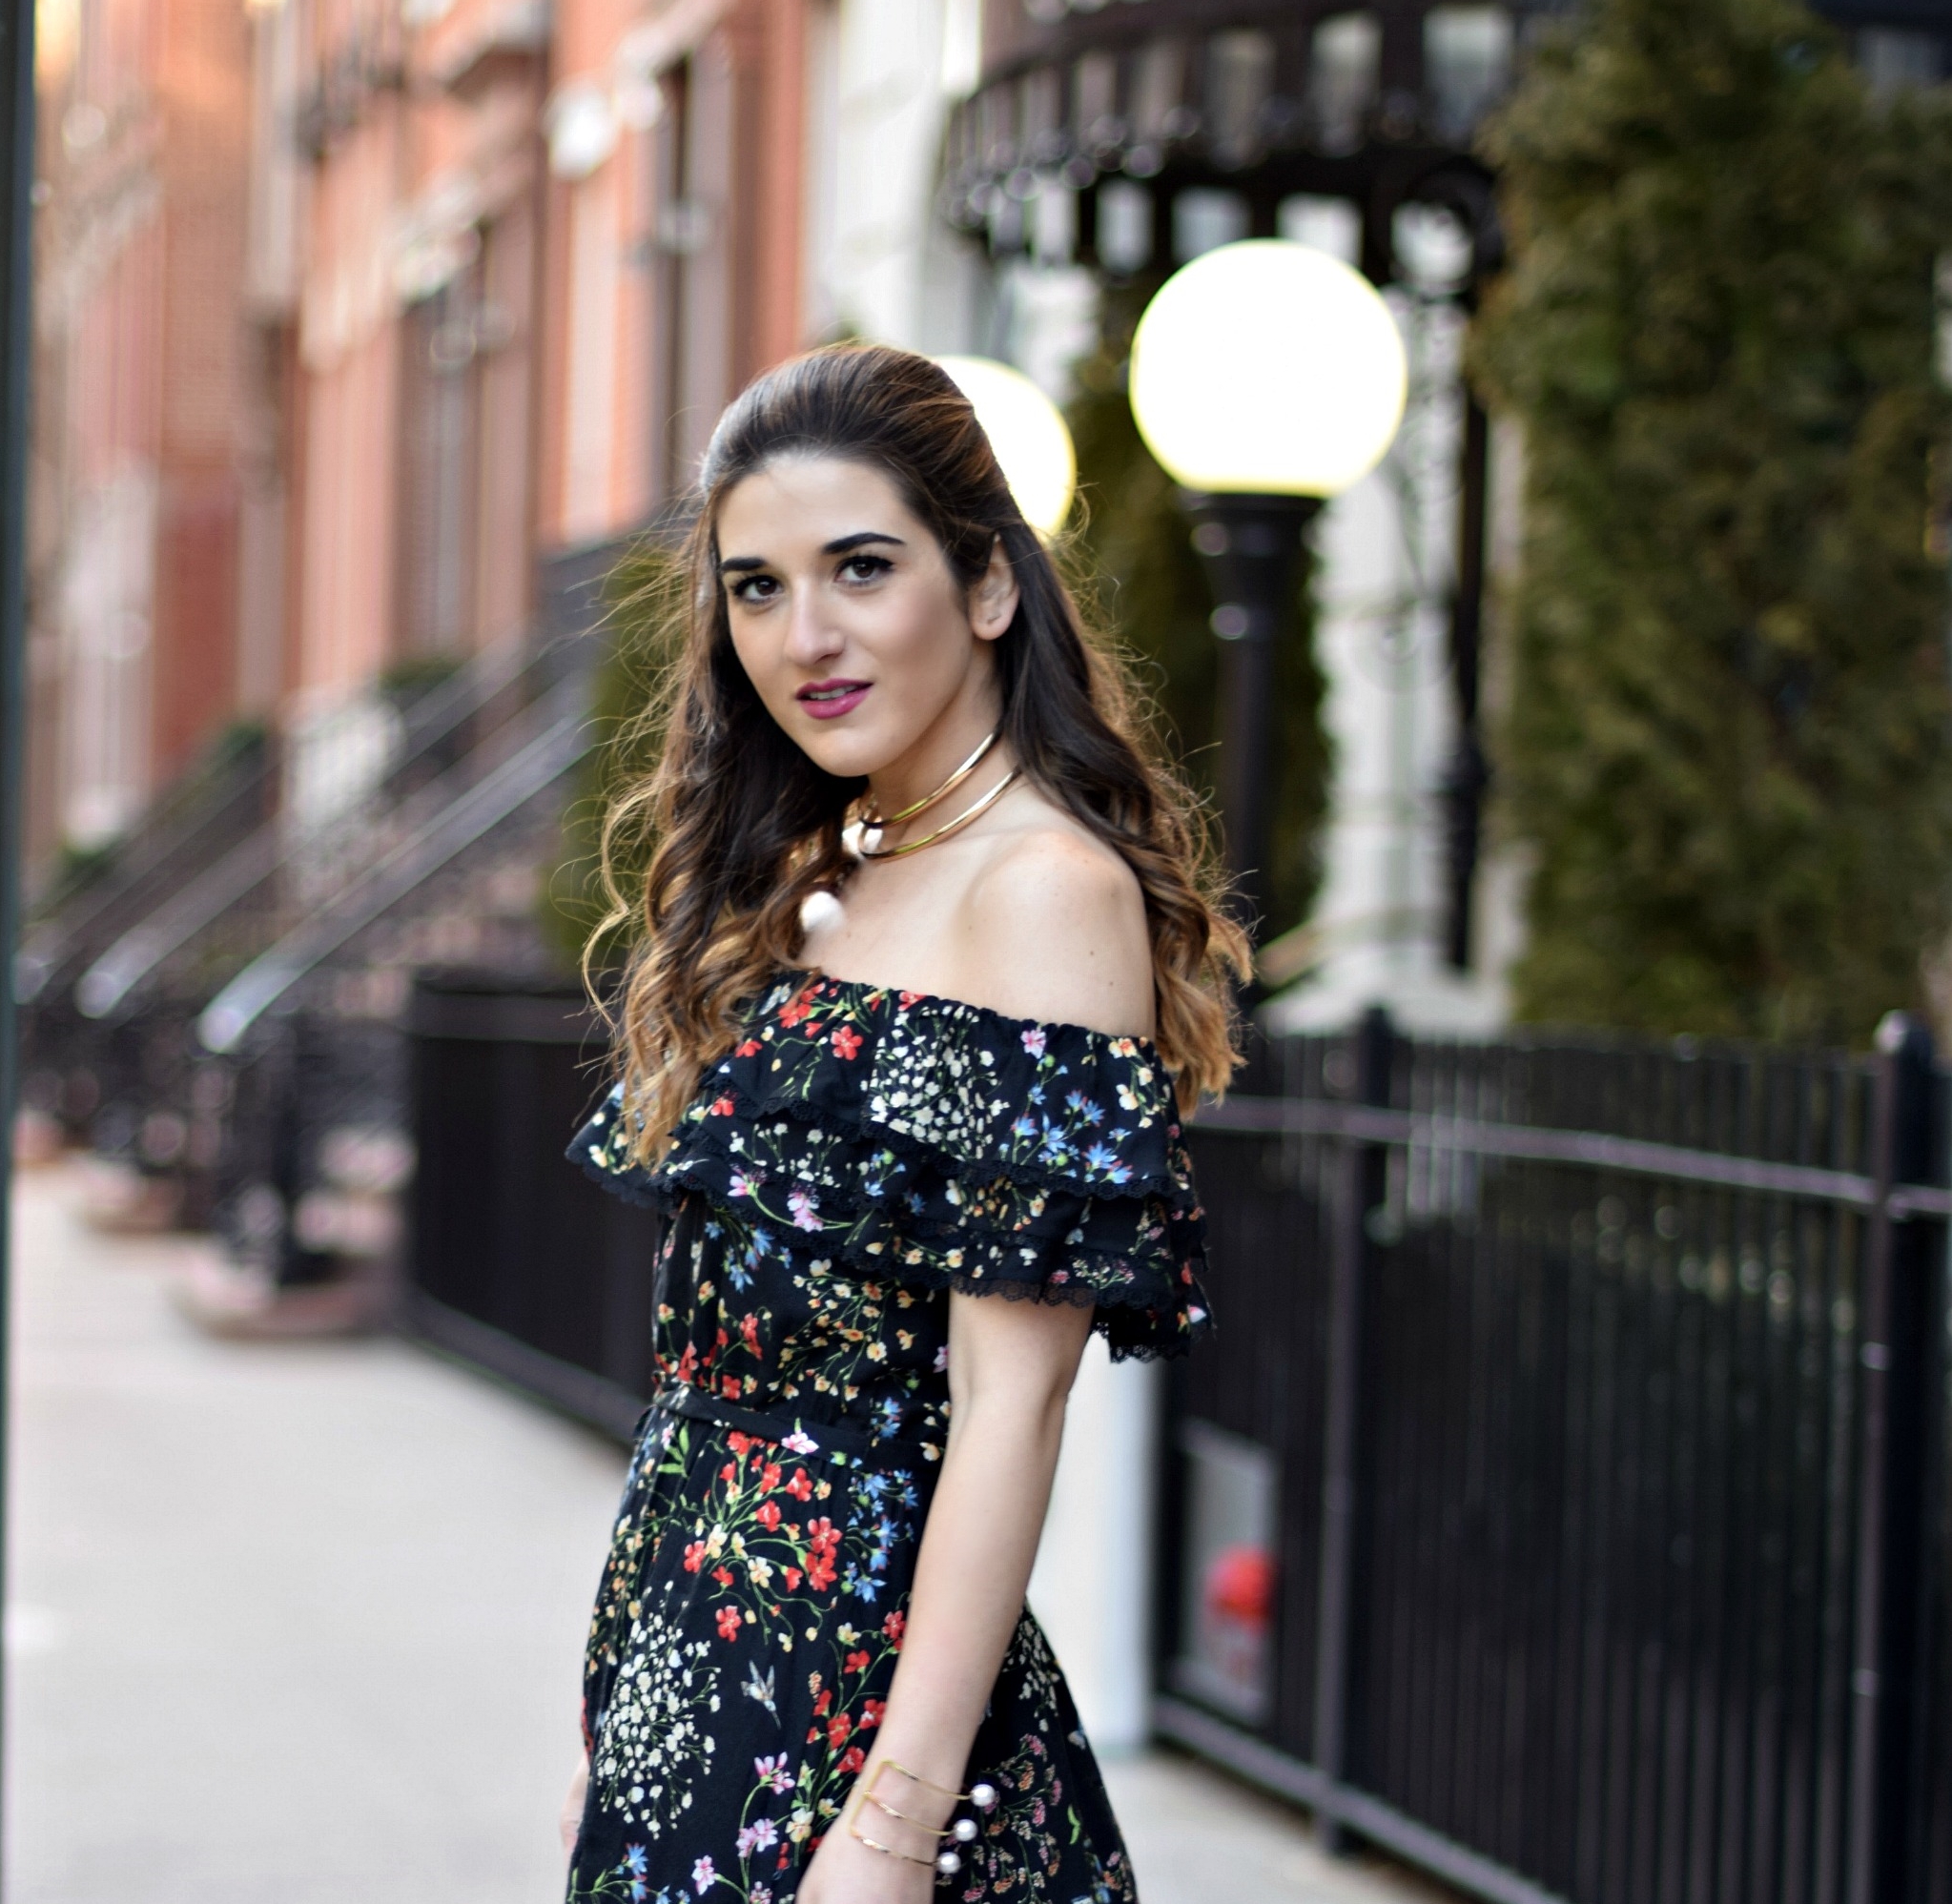 Alice Olivia Floral Dress Louboutins & Love Fashion Blog Esther Santer NYC Street Style Blogger Outfit OOTD Trunk Club Lydell Hair Brunette Model New York City Photoshoot Spring Summer Choker Bracelet Gold Jewelry Pretty Beautiful Inspo Shoulder Shoes.jpg